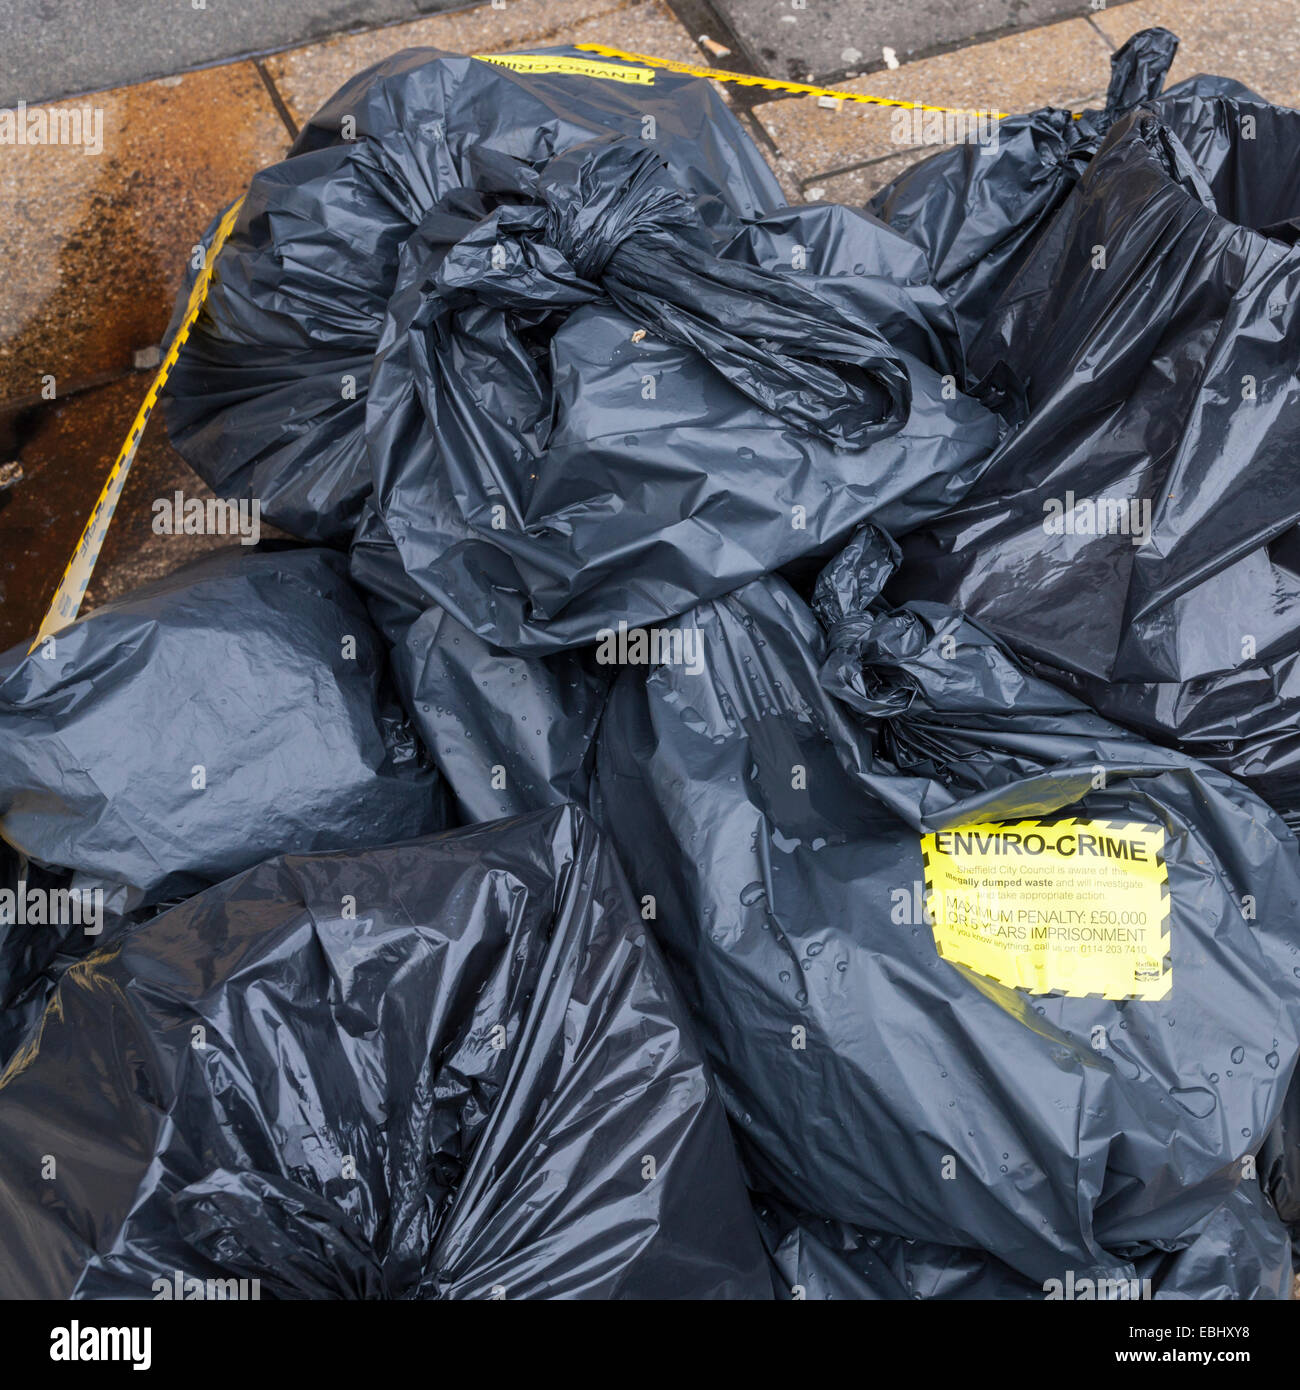 Environmental crime scene. Notice attached to bags of illegally dumped rubbish on a street. Sheffield city centre, England, UK Stock Photo